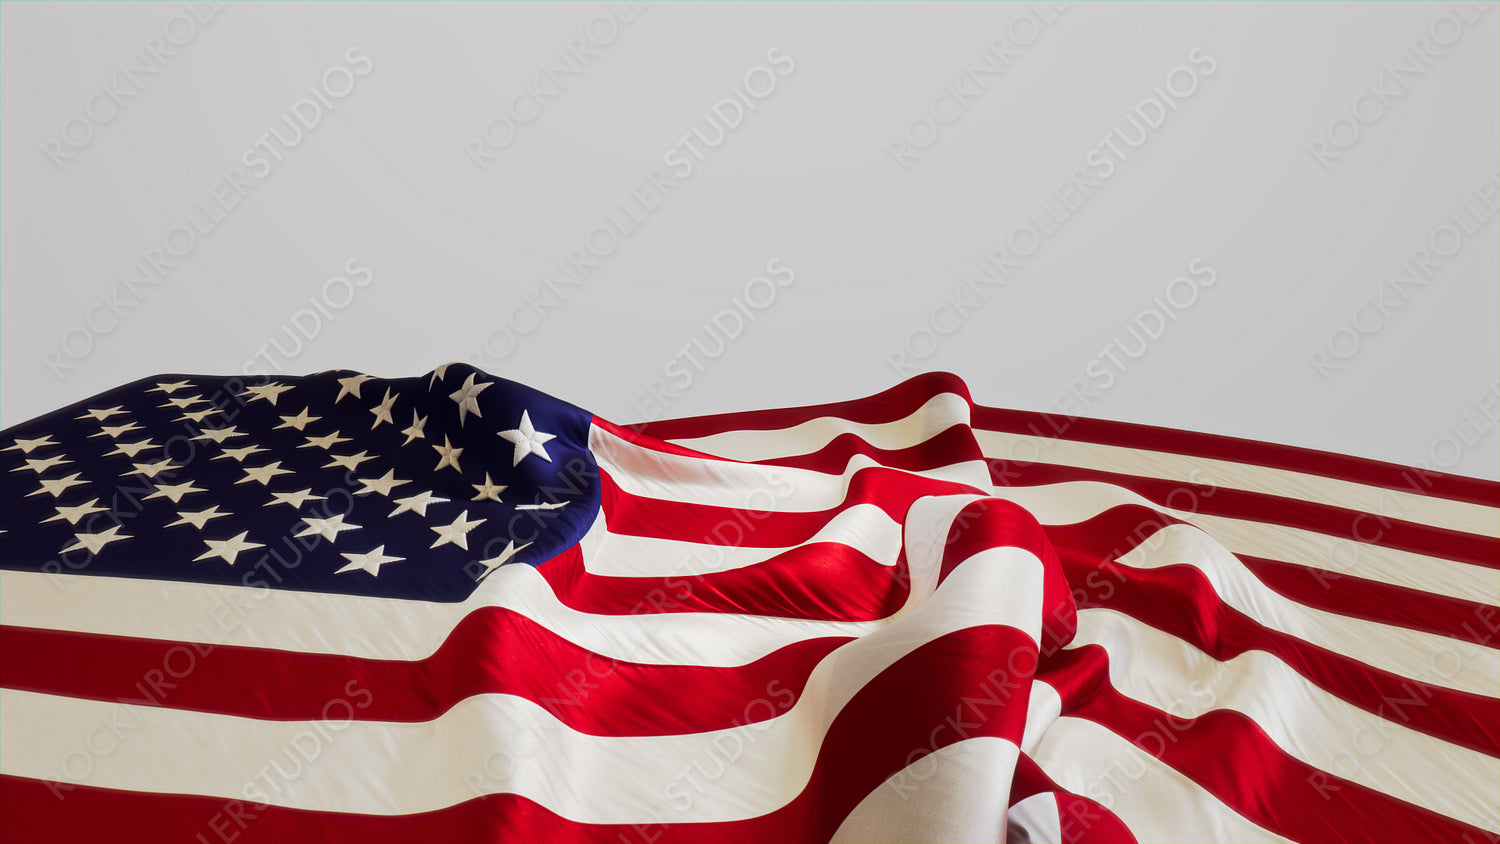 Independence Day Banner. Premium Holiday Background featuring American Flag Isolated on White with Copy-Space.